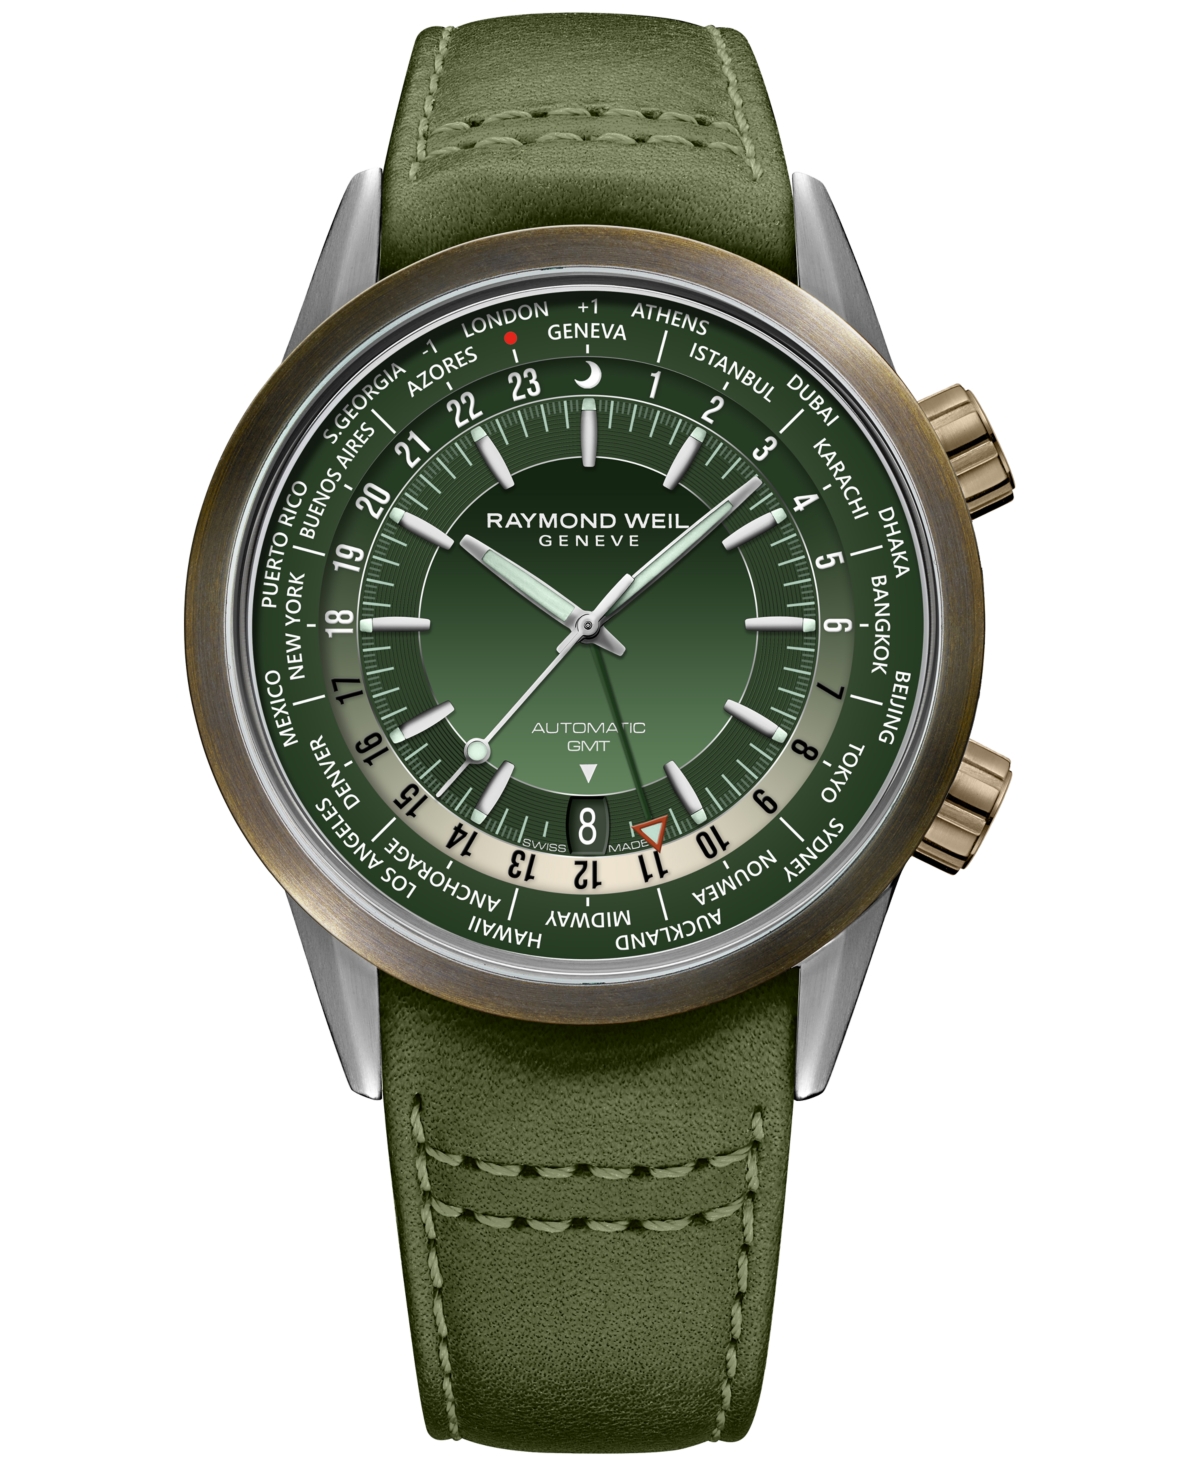 Men's Swiss Automatic Freelancer Gmt Green Leather Strap Watch 41mm - Green